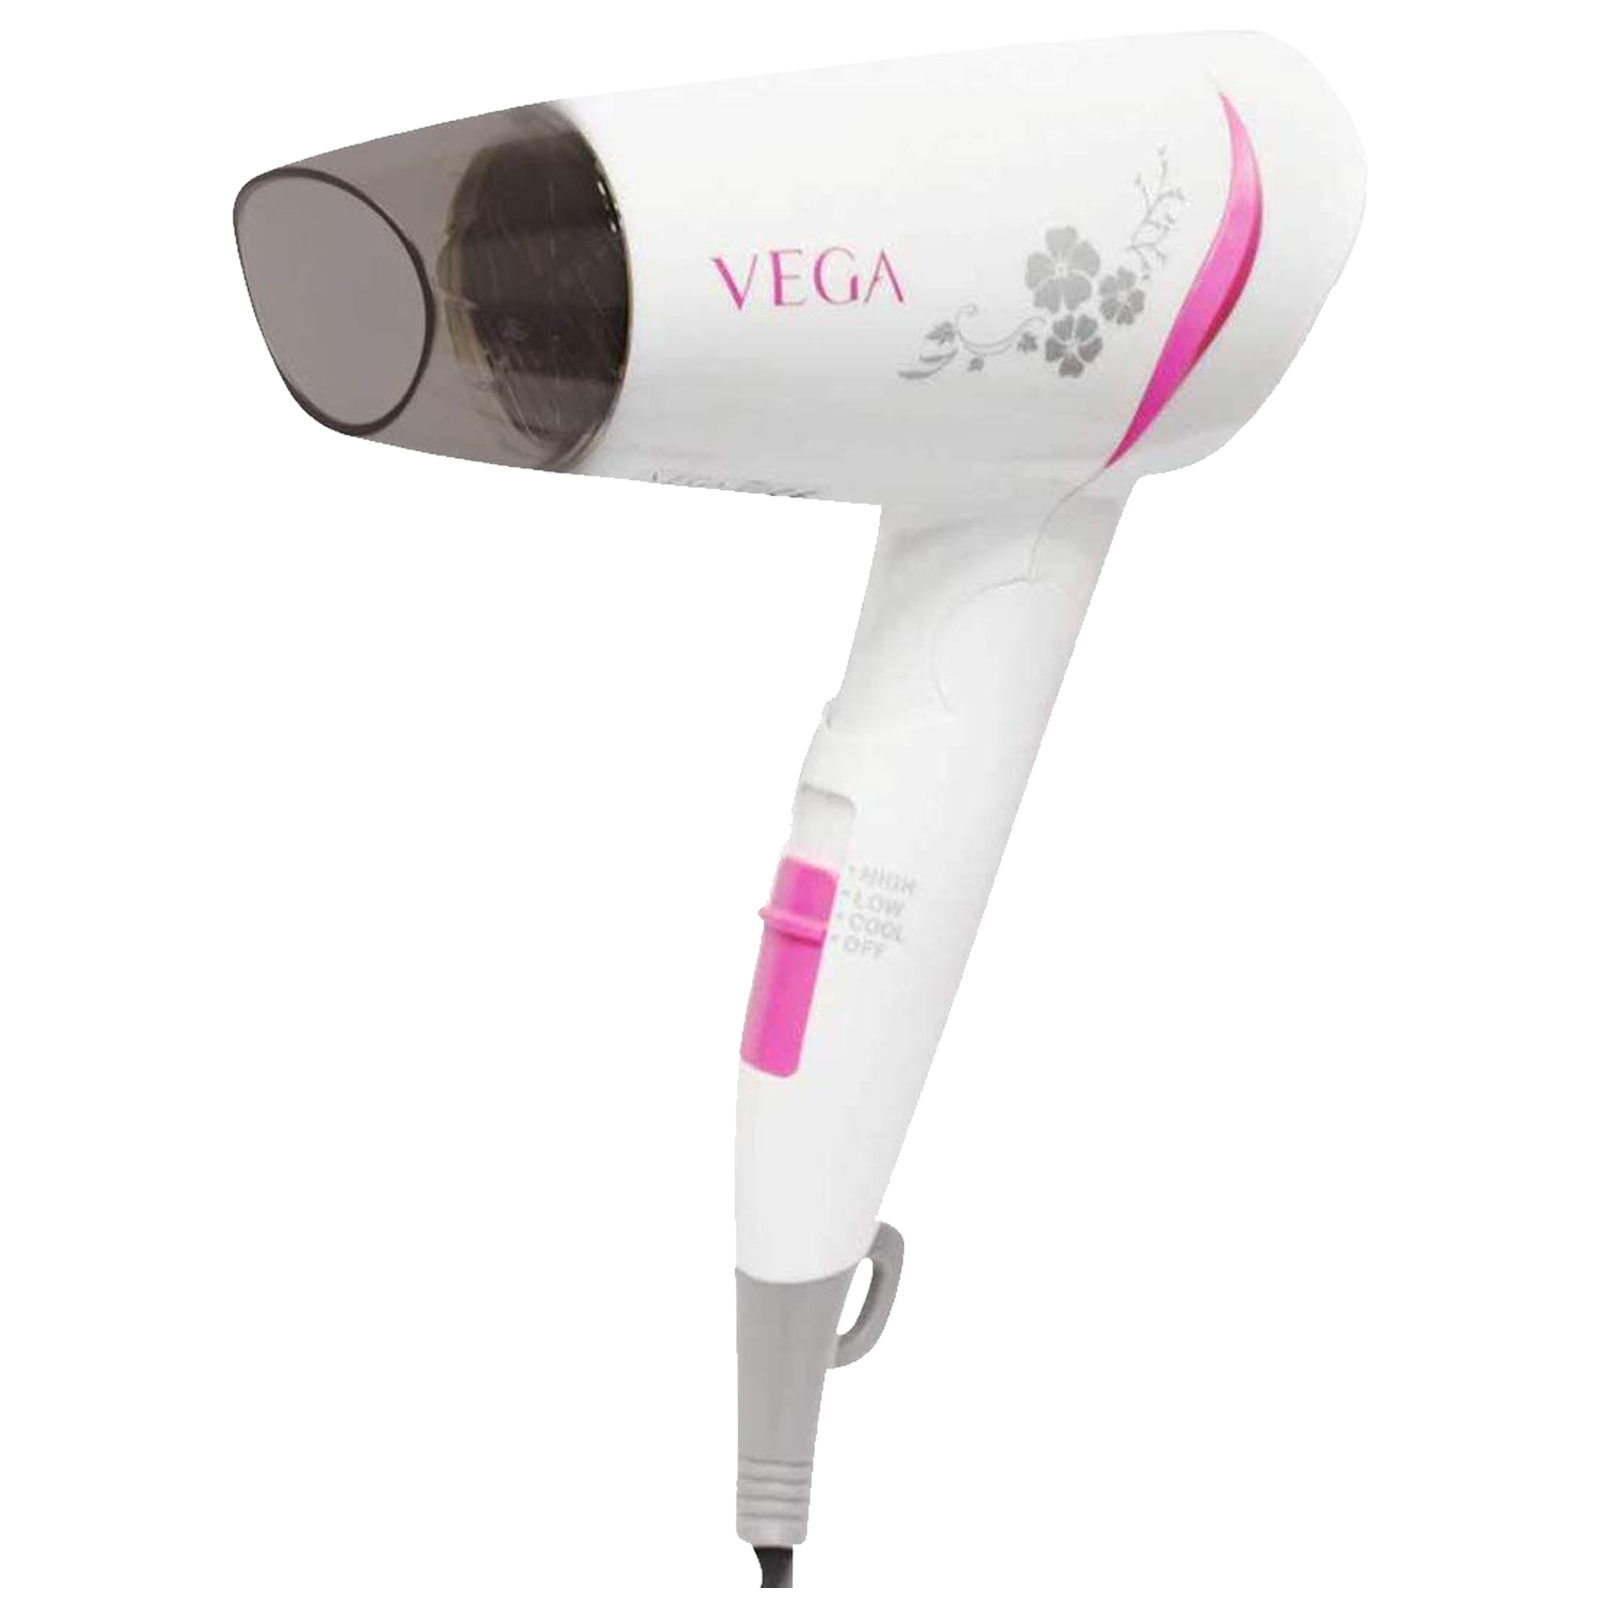 Vega Go-Style 2 Setting Hair Dryer (Safety Automatic Overheat Cut Out, VHDH-18, Pink)